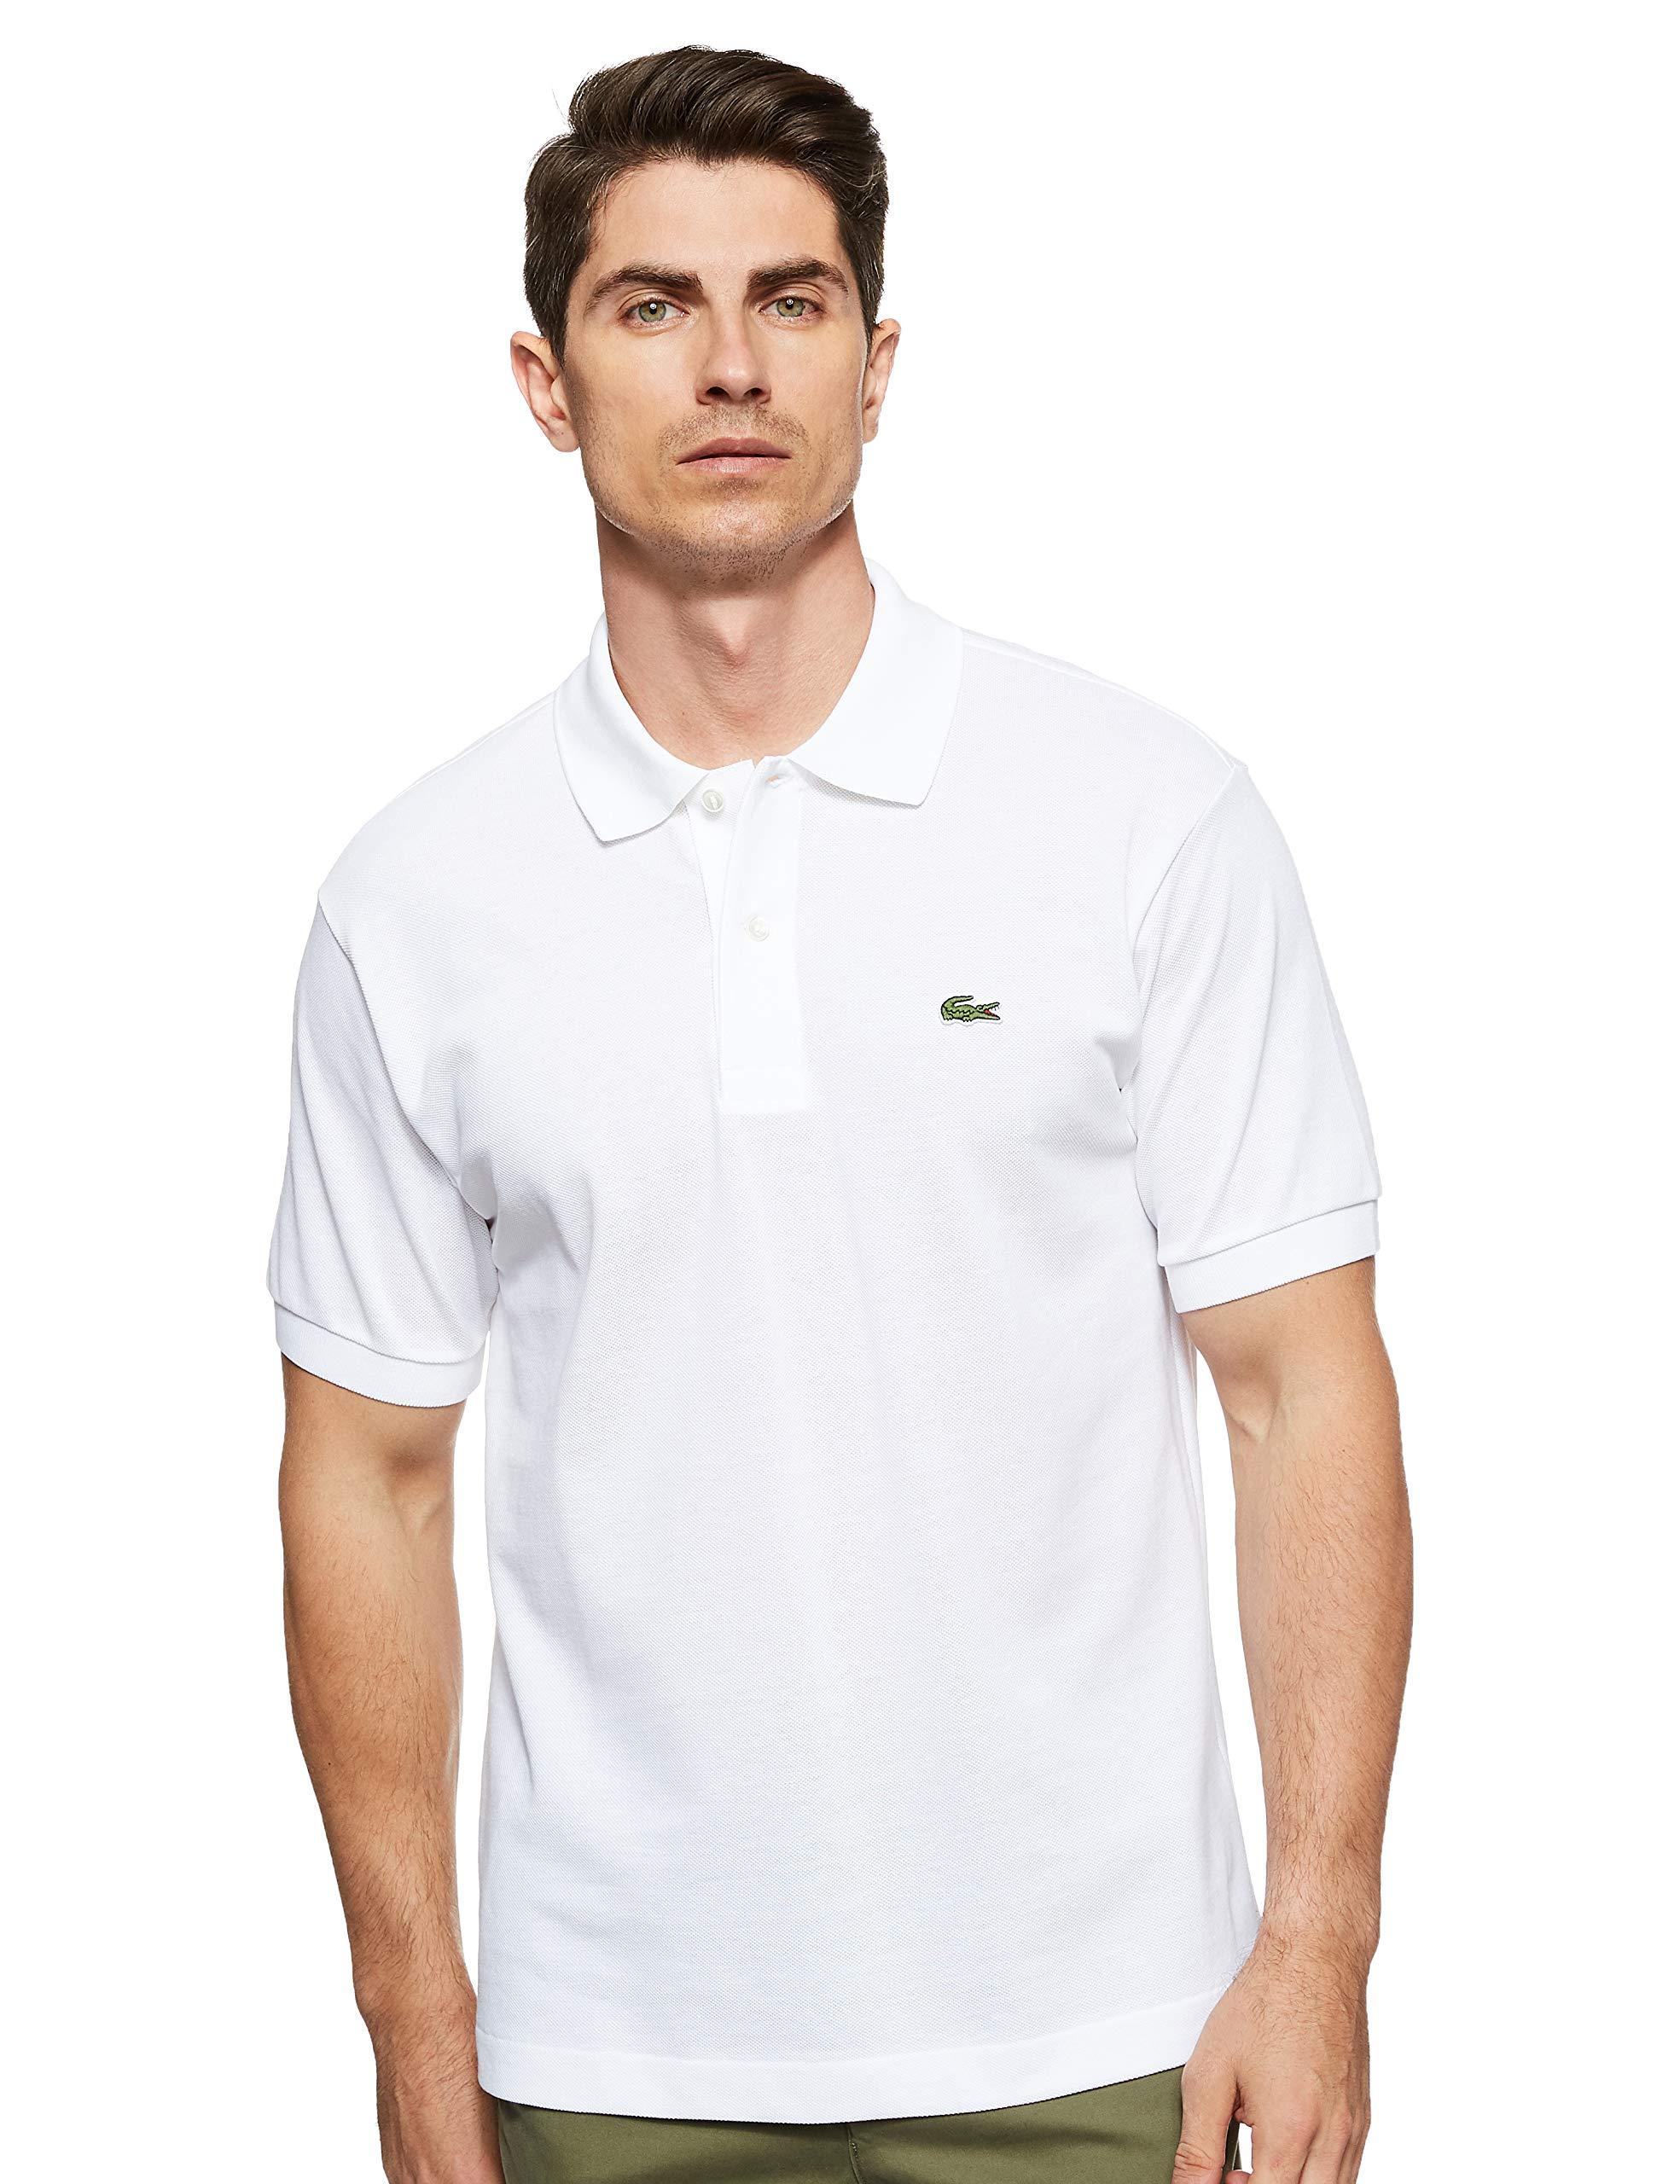 Lacoste Cotton S Short Sleeve L.12.12 Pique Polo Shirt Polo Shirt in White  for Men - Save 40% - Lyst